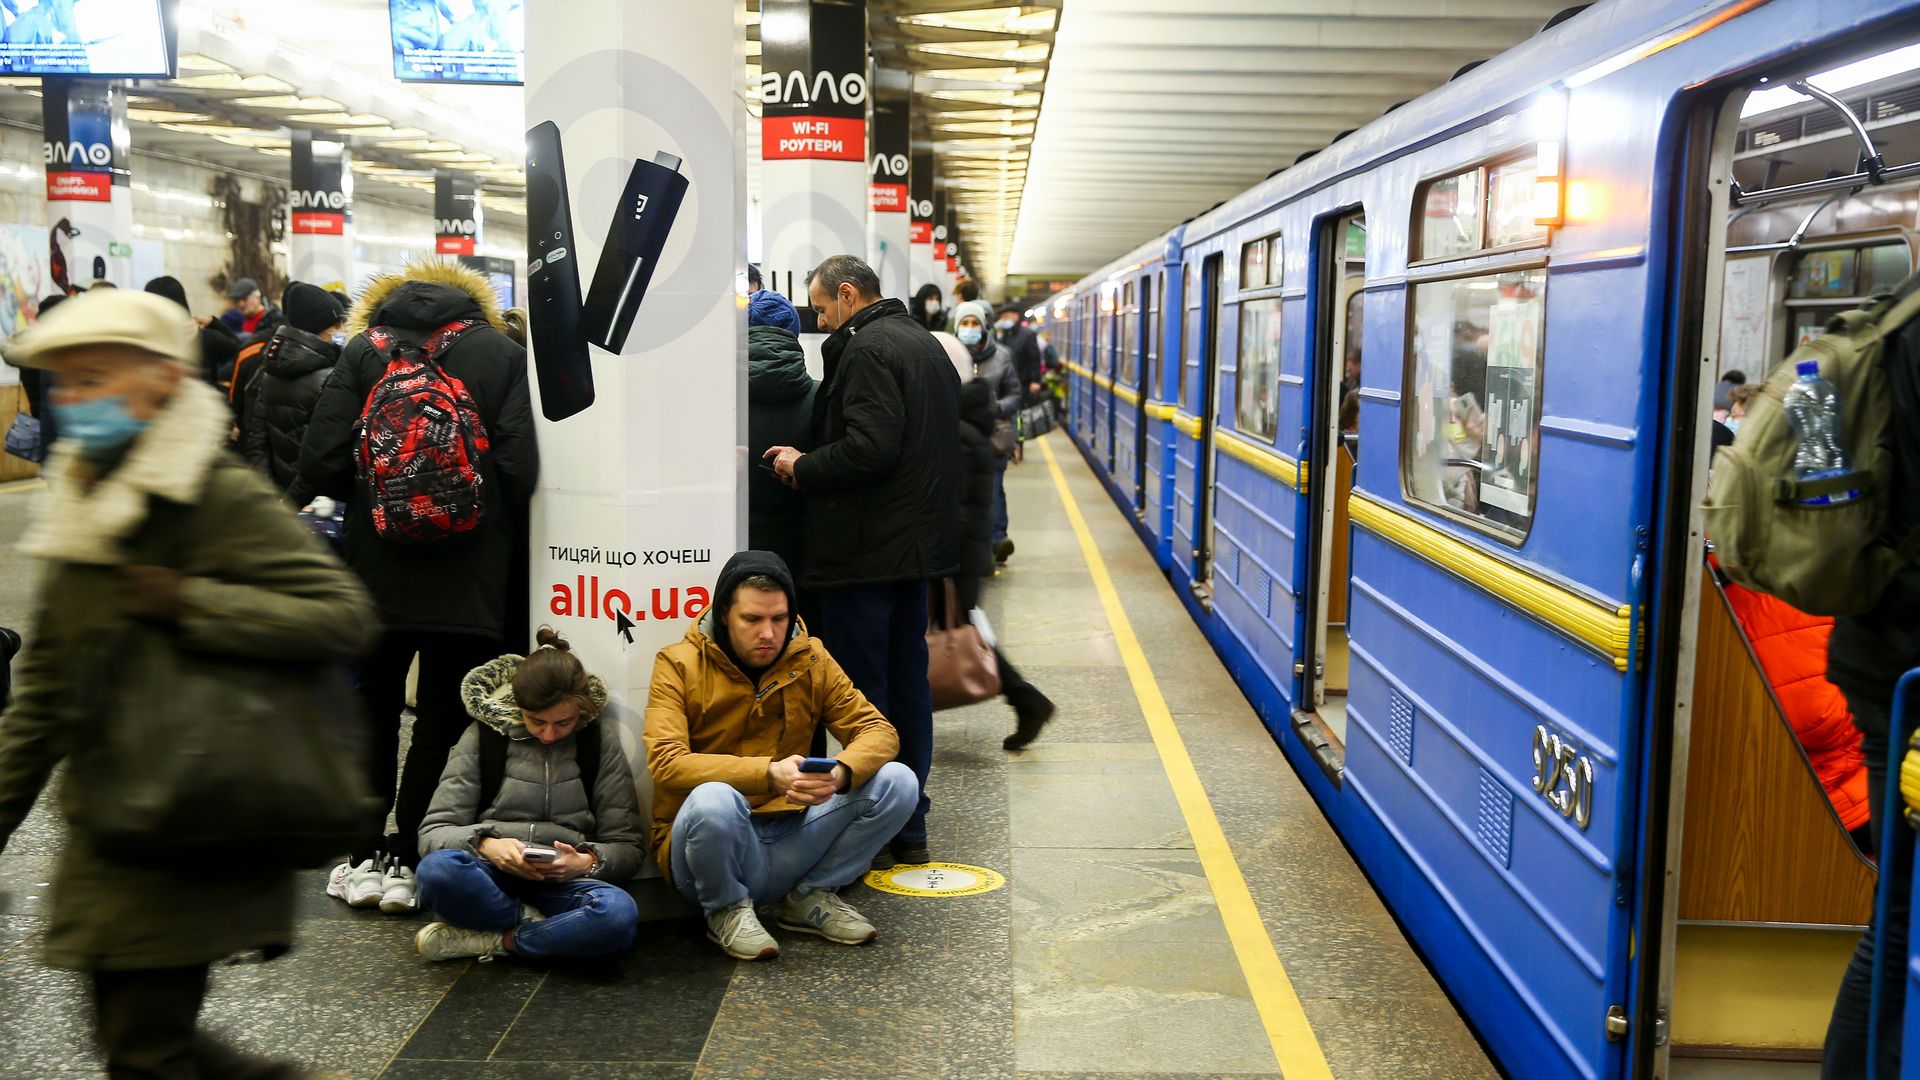 Ukrainians are seen huddling in a Kyiv subway station during Russia's assault on Thursday.